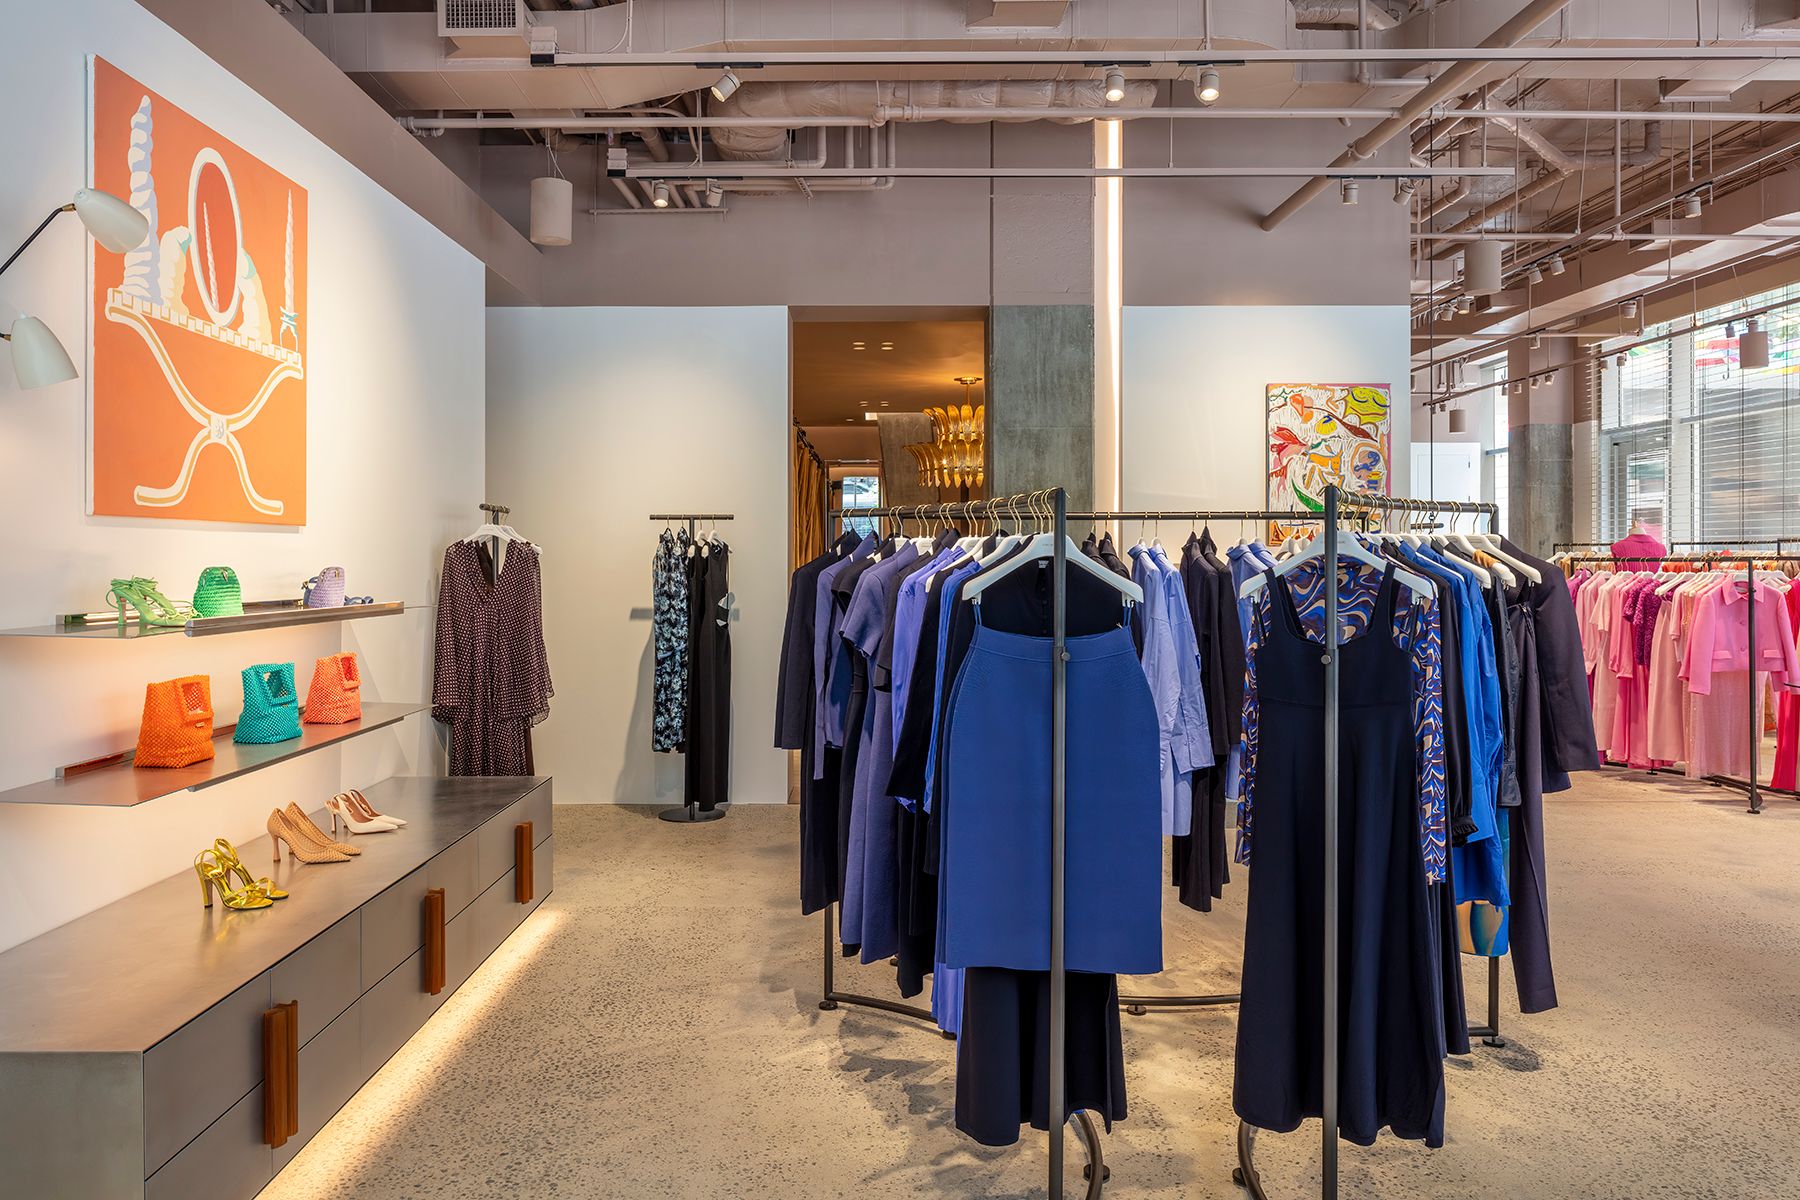 Interior view of the boutique with racks of blue women's clothing and shelves with various shoes and bags